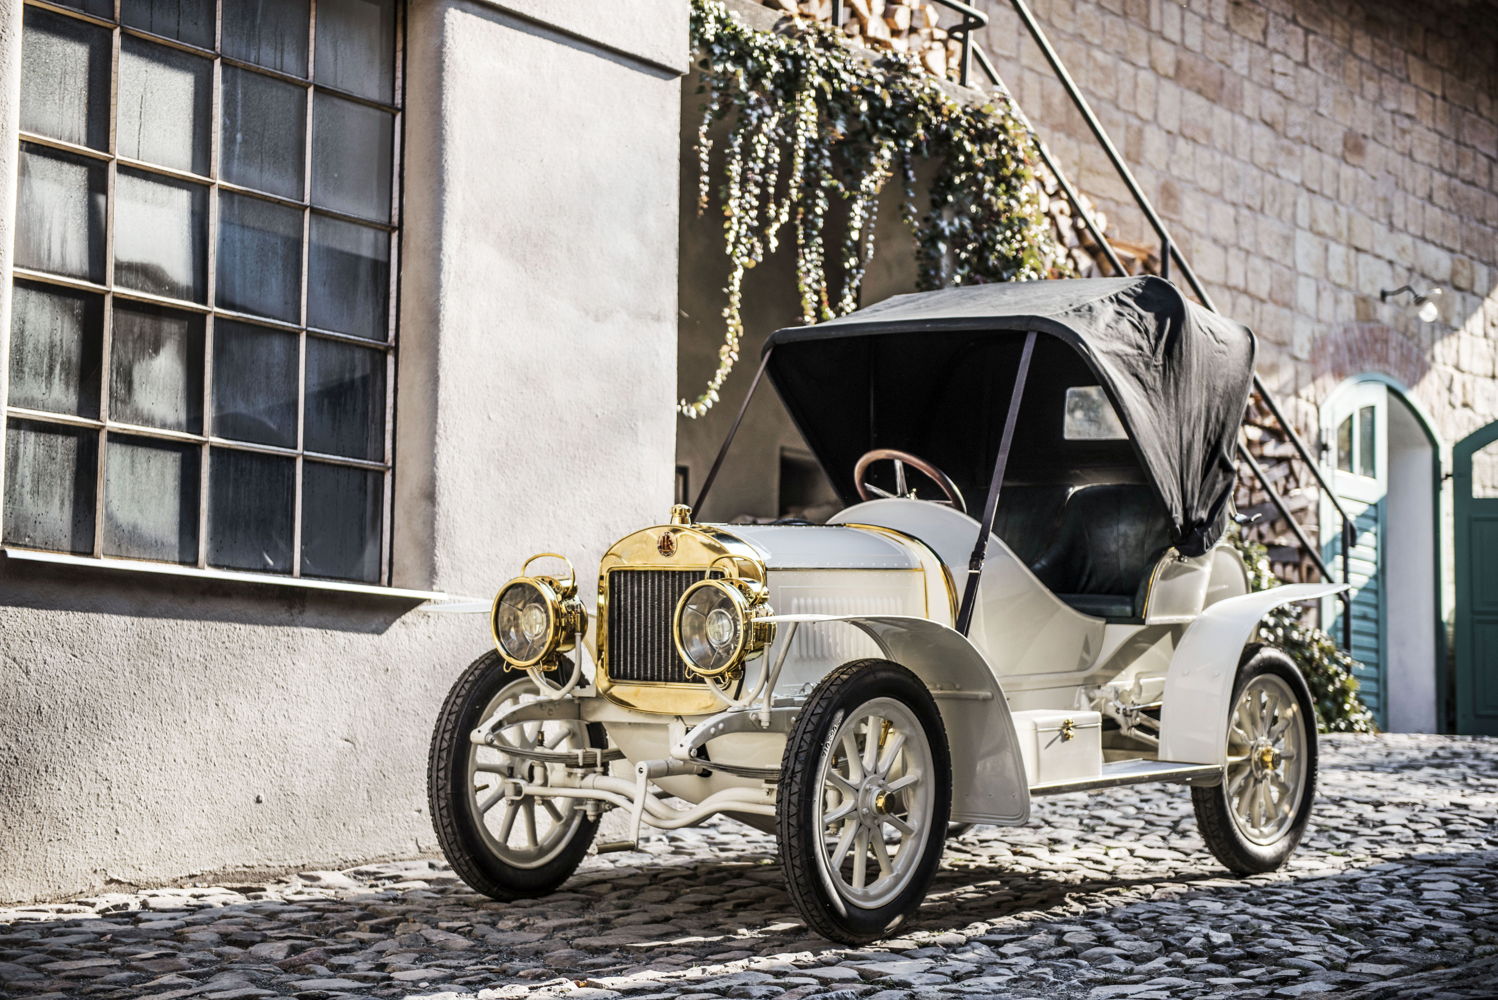 The Laurin & Klement BSC sports car from 1908 with its 12 hp
(8.8 kW) two-cylinder engine reached speeds of up to 75 km/h.
After being faithfully restored, the only surviving copy is treasured
at the ŠKODA Museum. The brand’s sporting tradition dates back
to 1901.